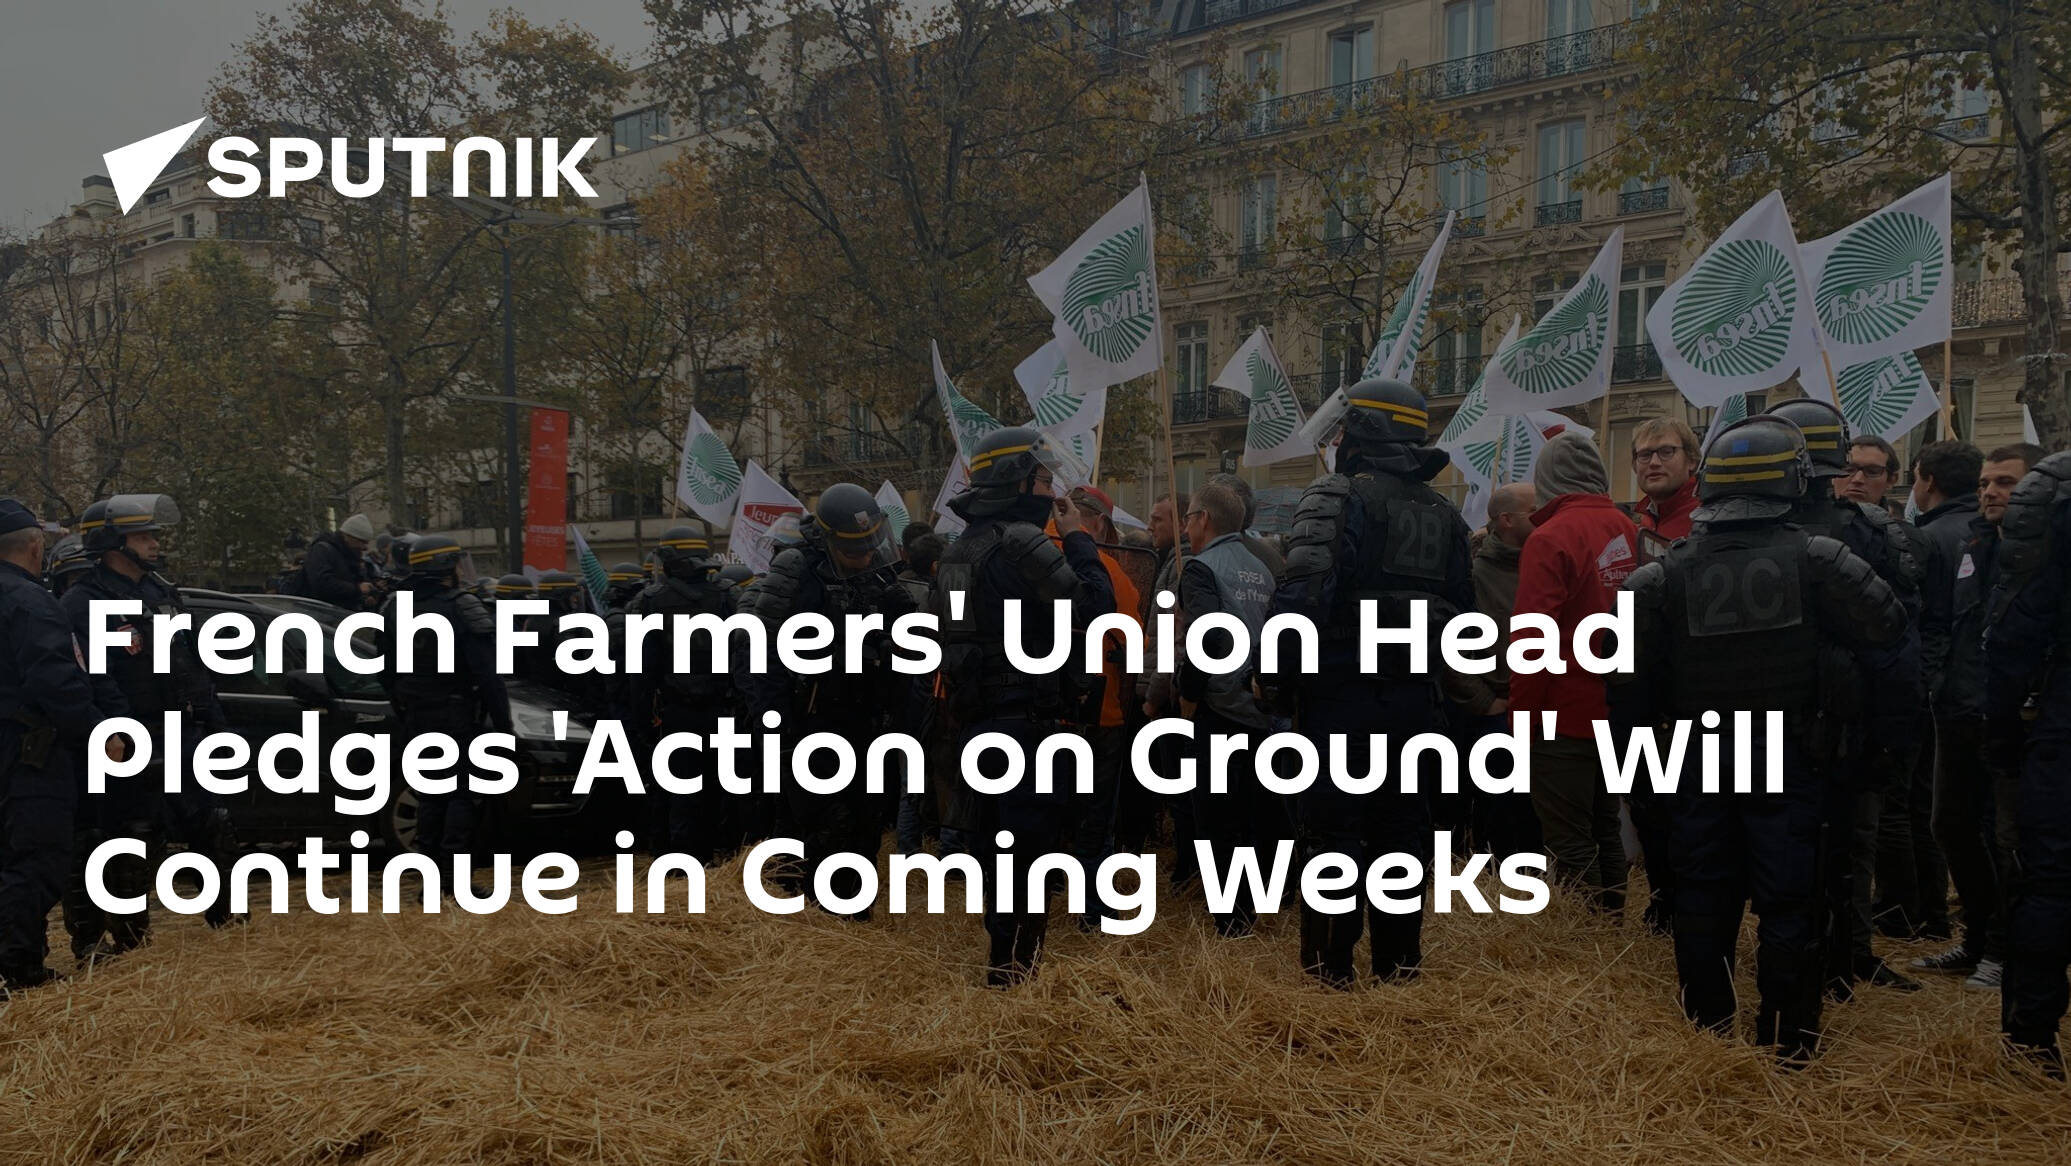 French Farmers' Union Head Pledges 'Action on Ground' Will Continue in Coming Weeks